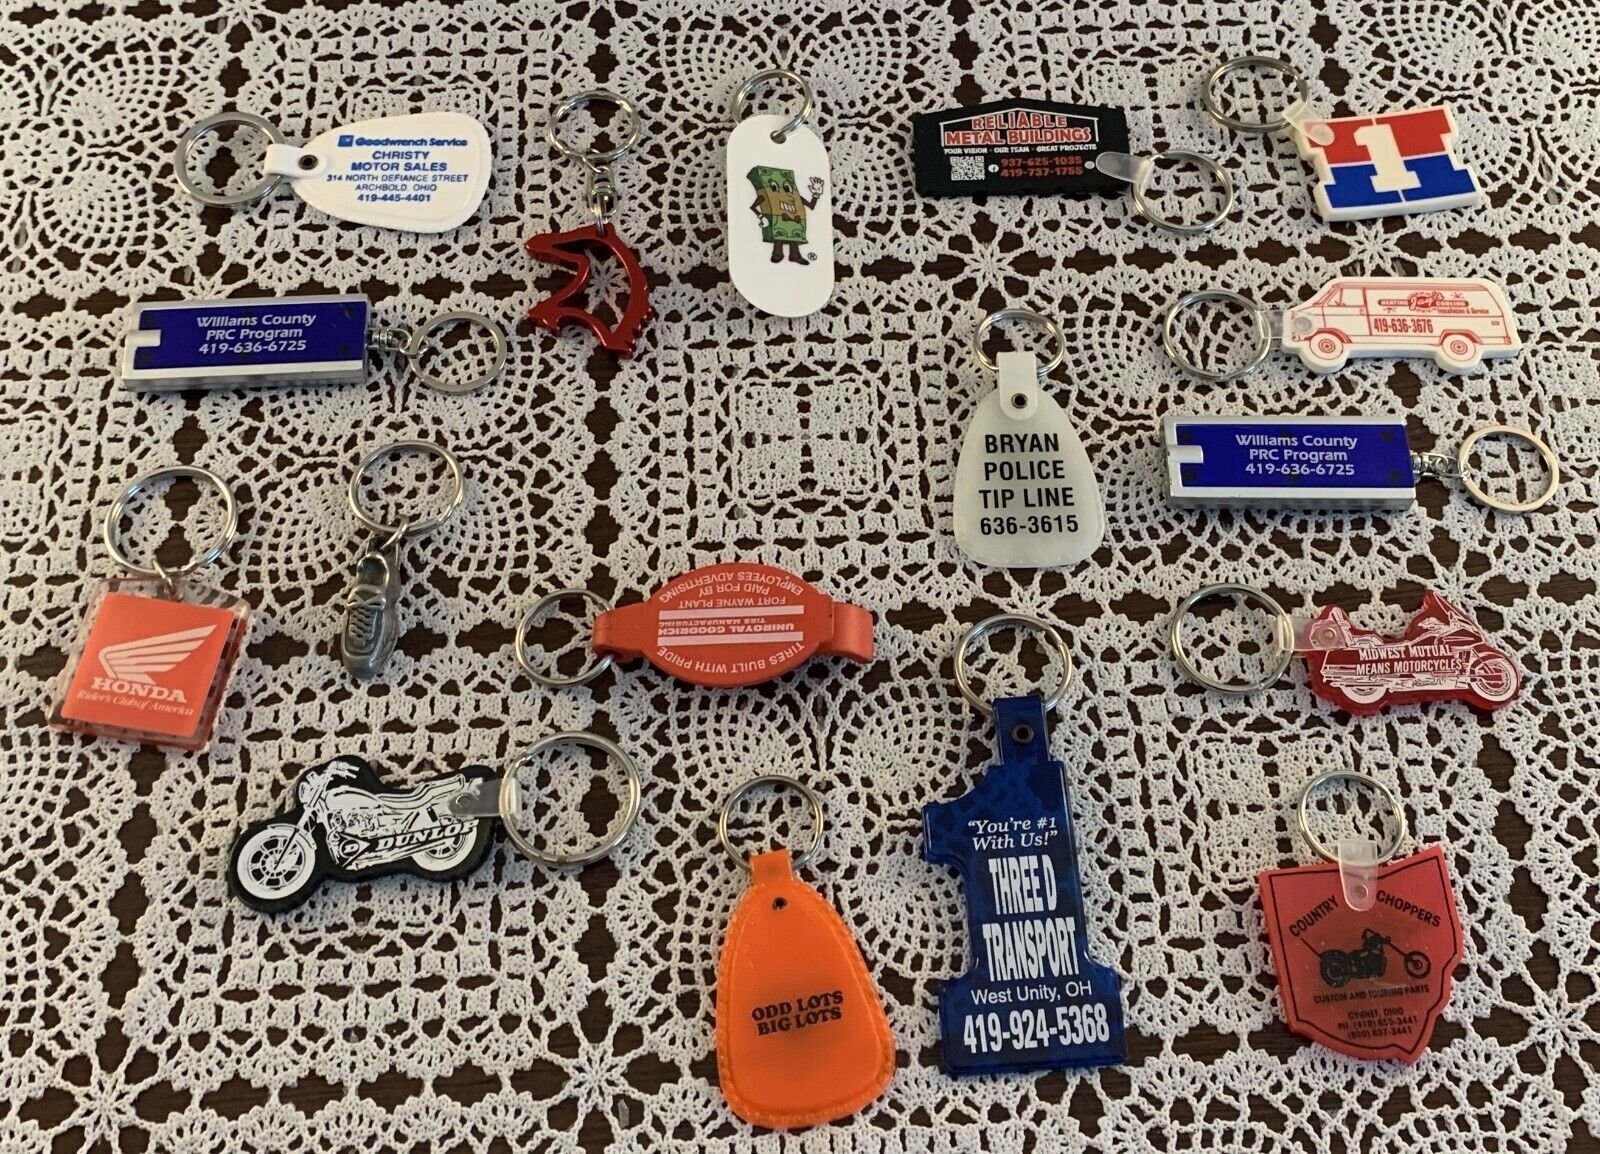 17 Assorted Advertising Keychains Motorcycles Honda Dunlop Uniroyal Odd Lots